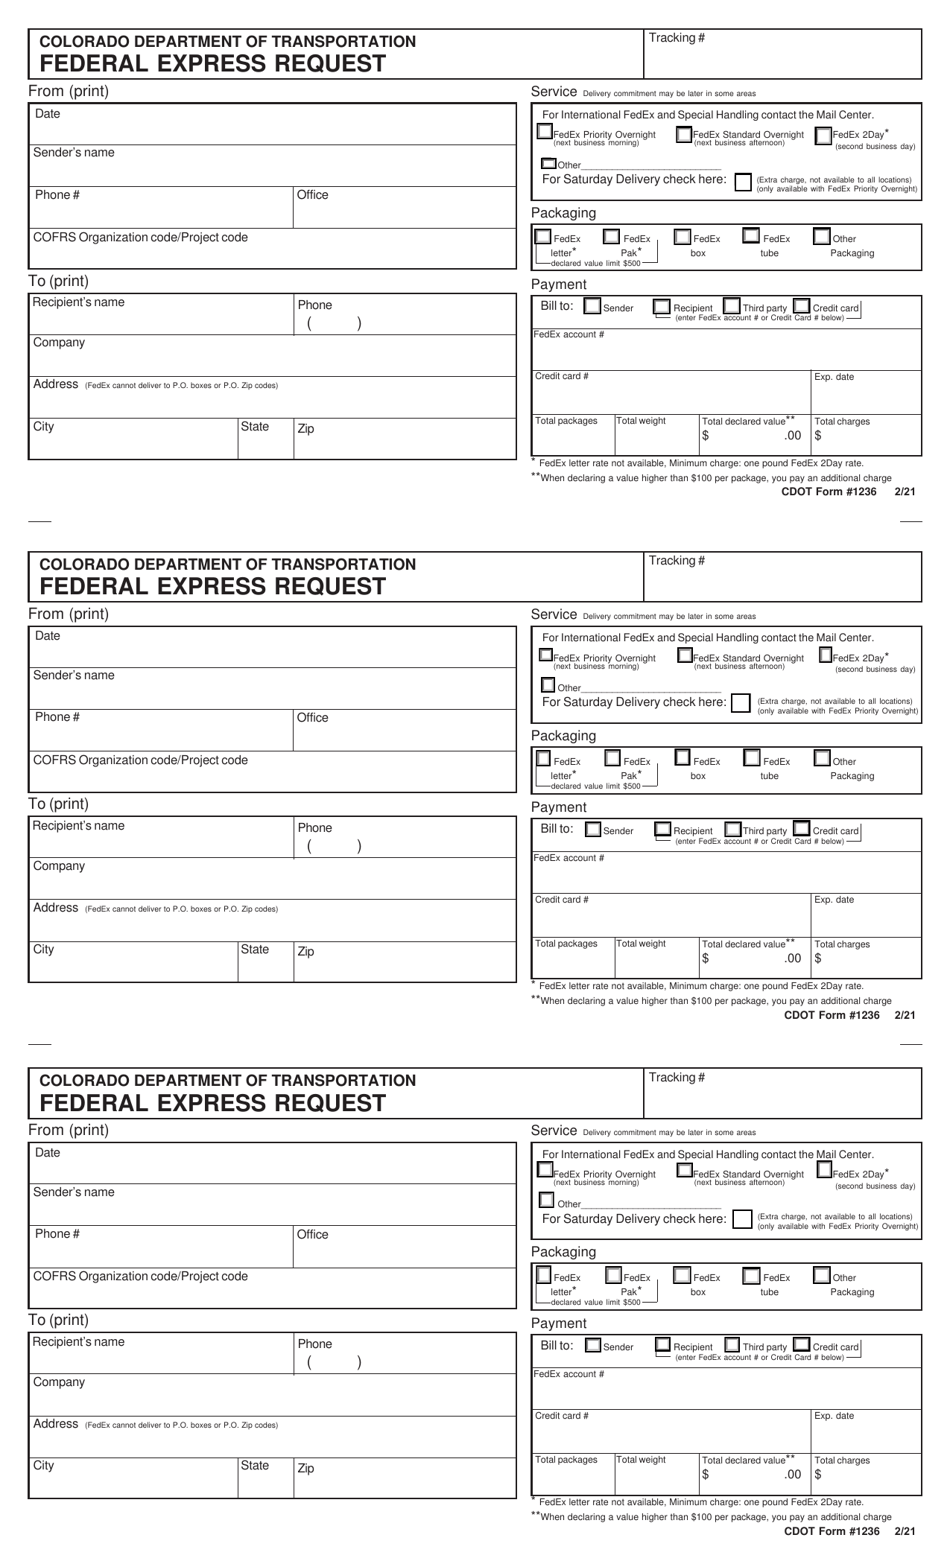 CDOT Form 1236 Federal Express Request - Colorado, Page 1